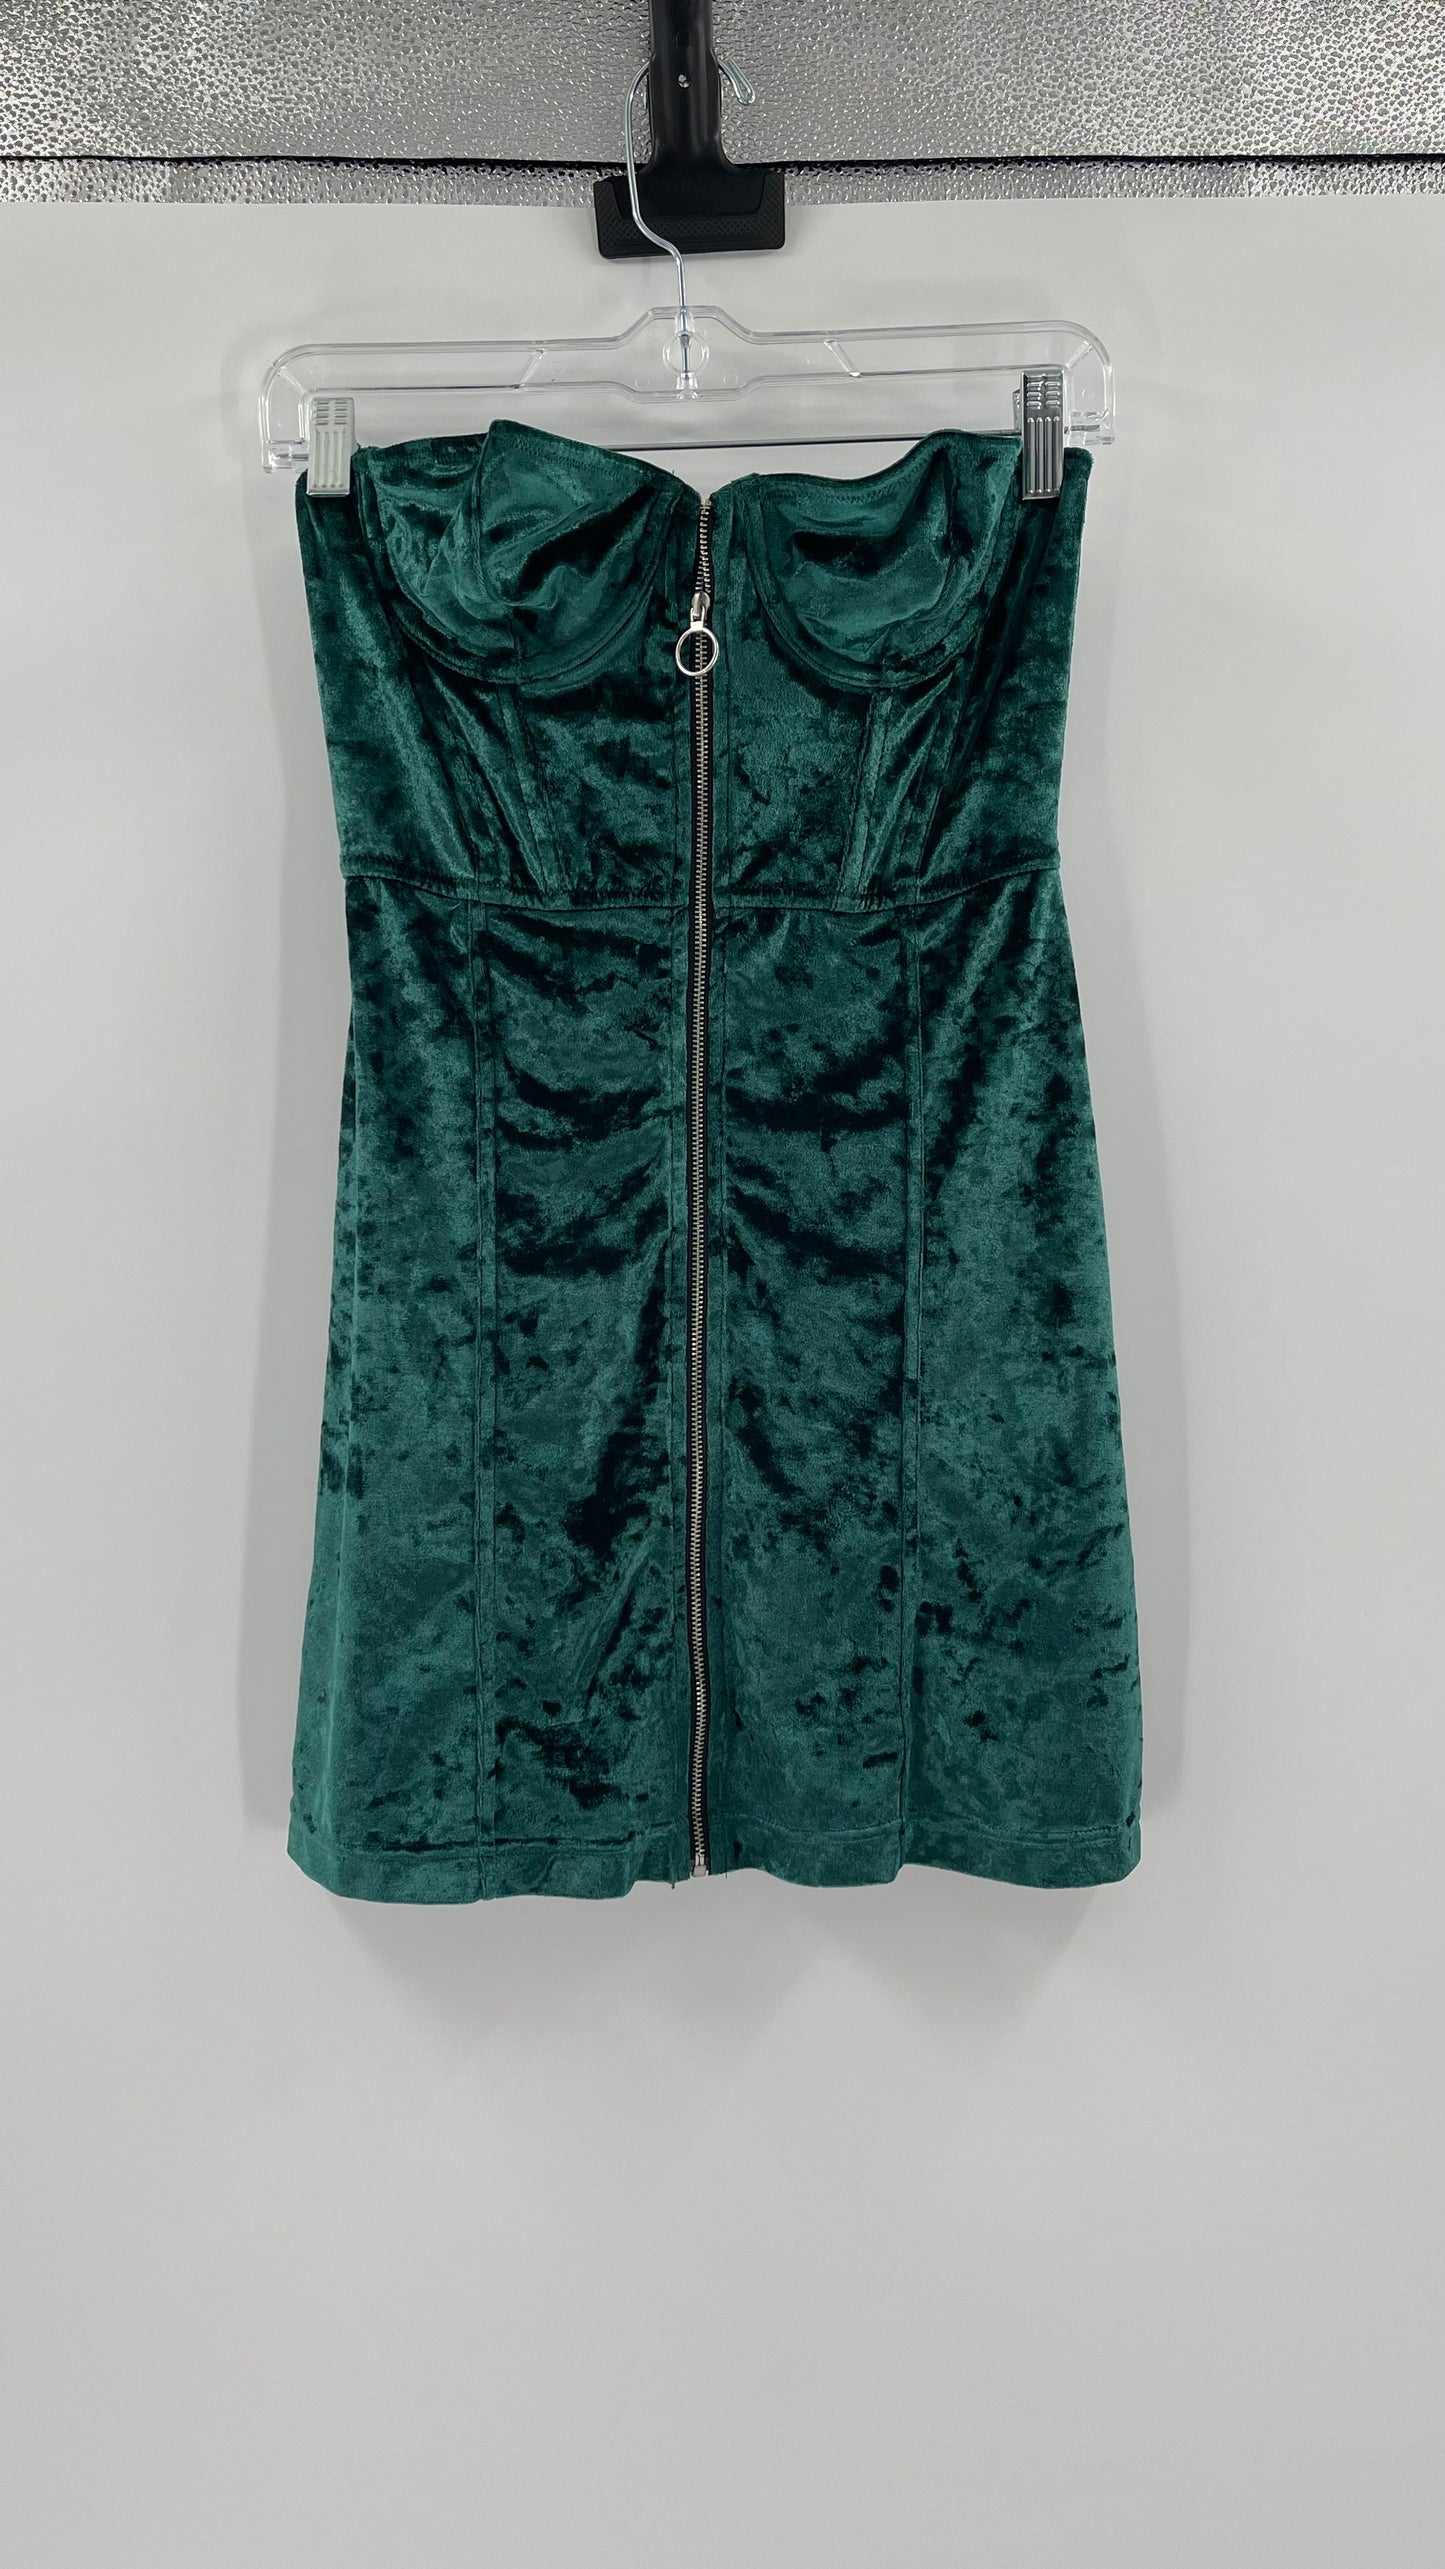 Emerald Green Urban Outfitters Zip Front Corset Dress (Small)